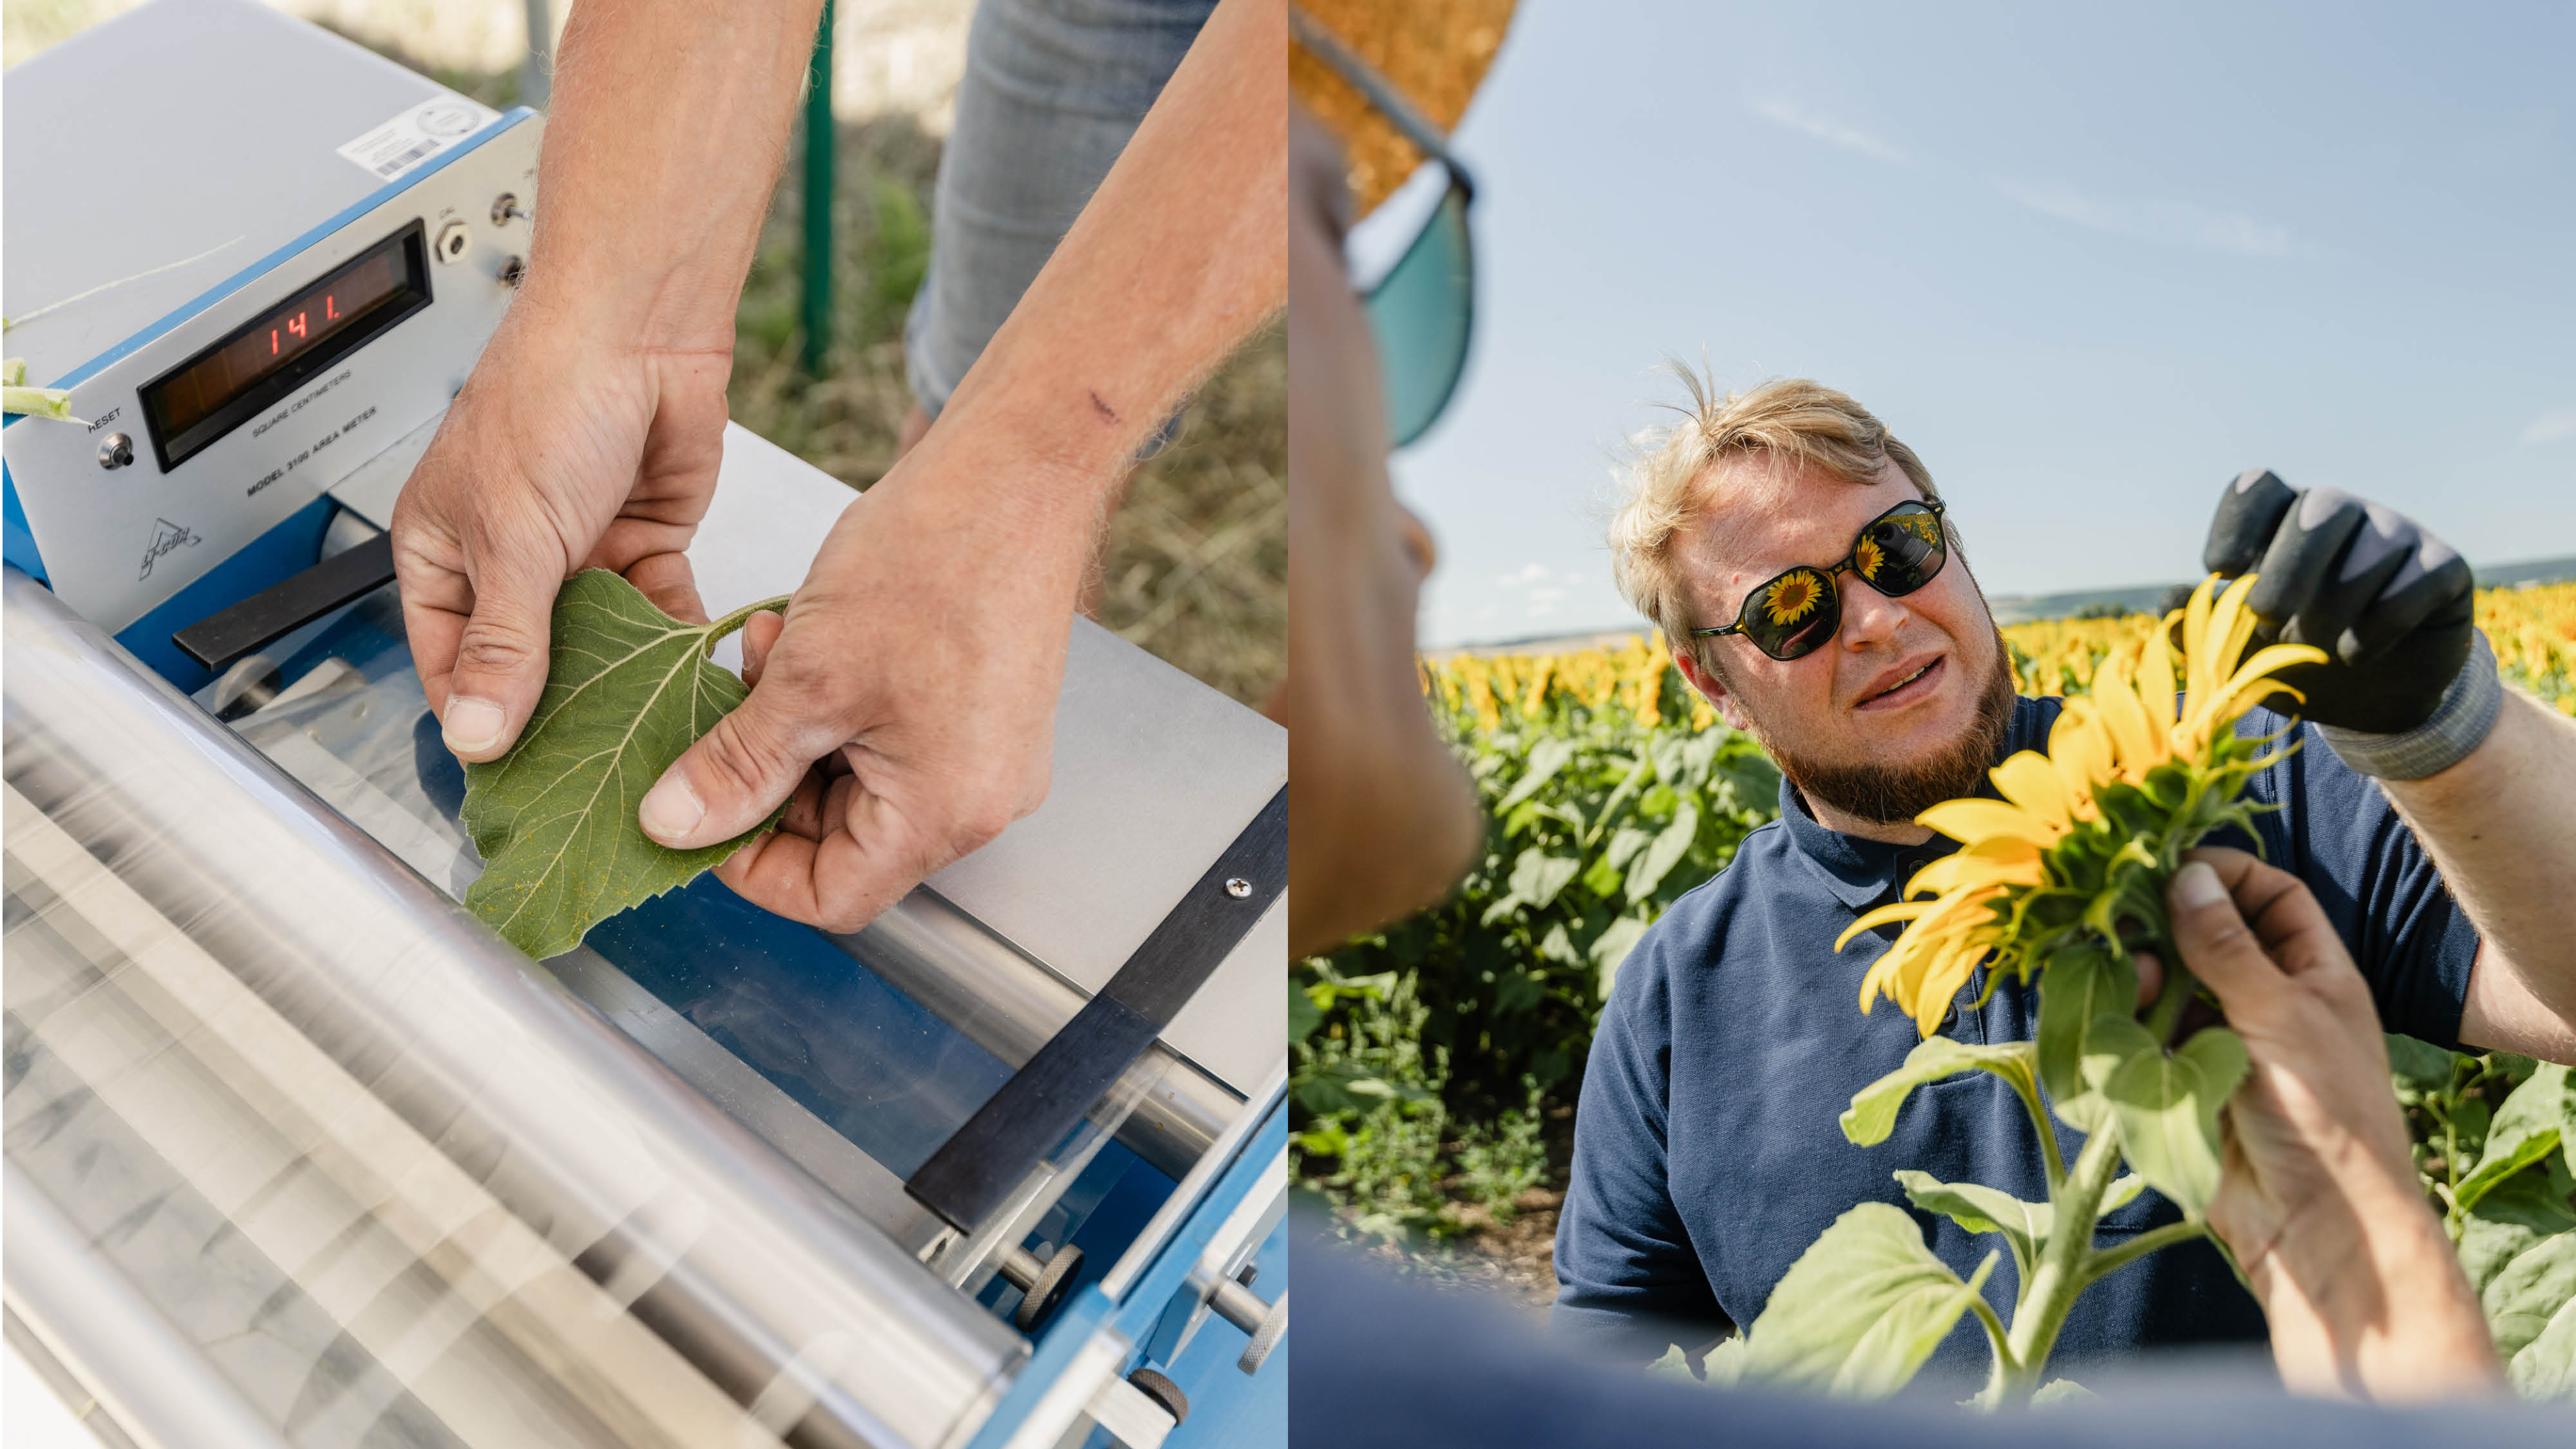 on the left: sunflower leaf being put into an scanning instrument. On the right: scientists looking at the petals of a sunflower